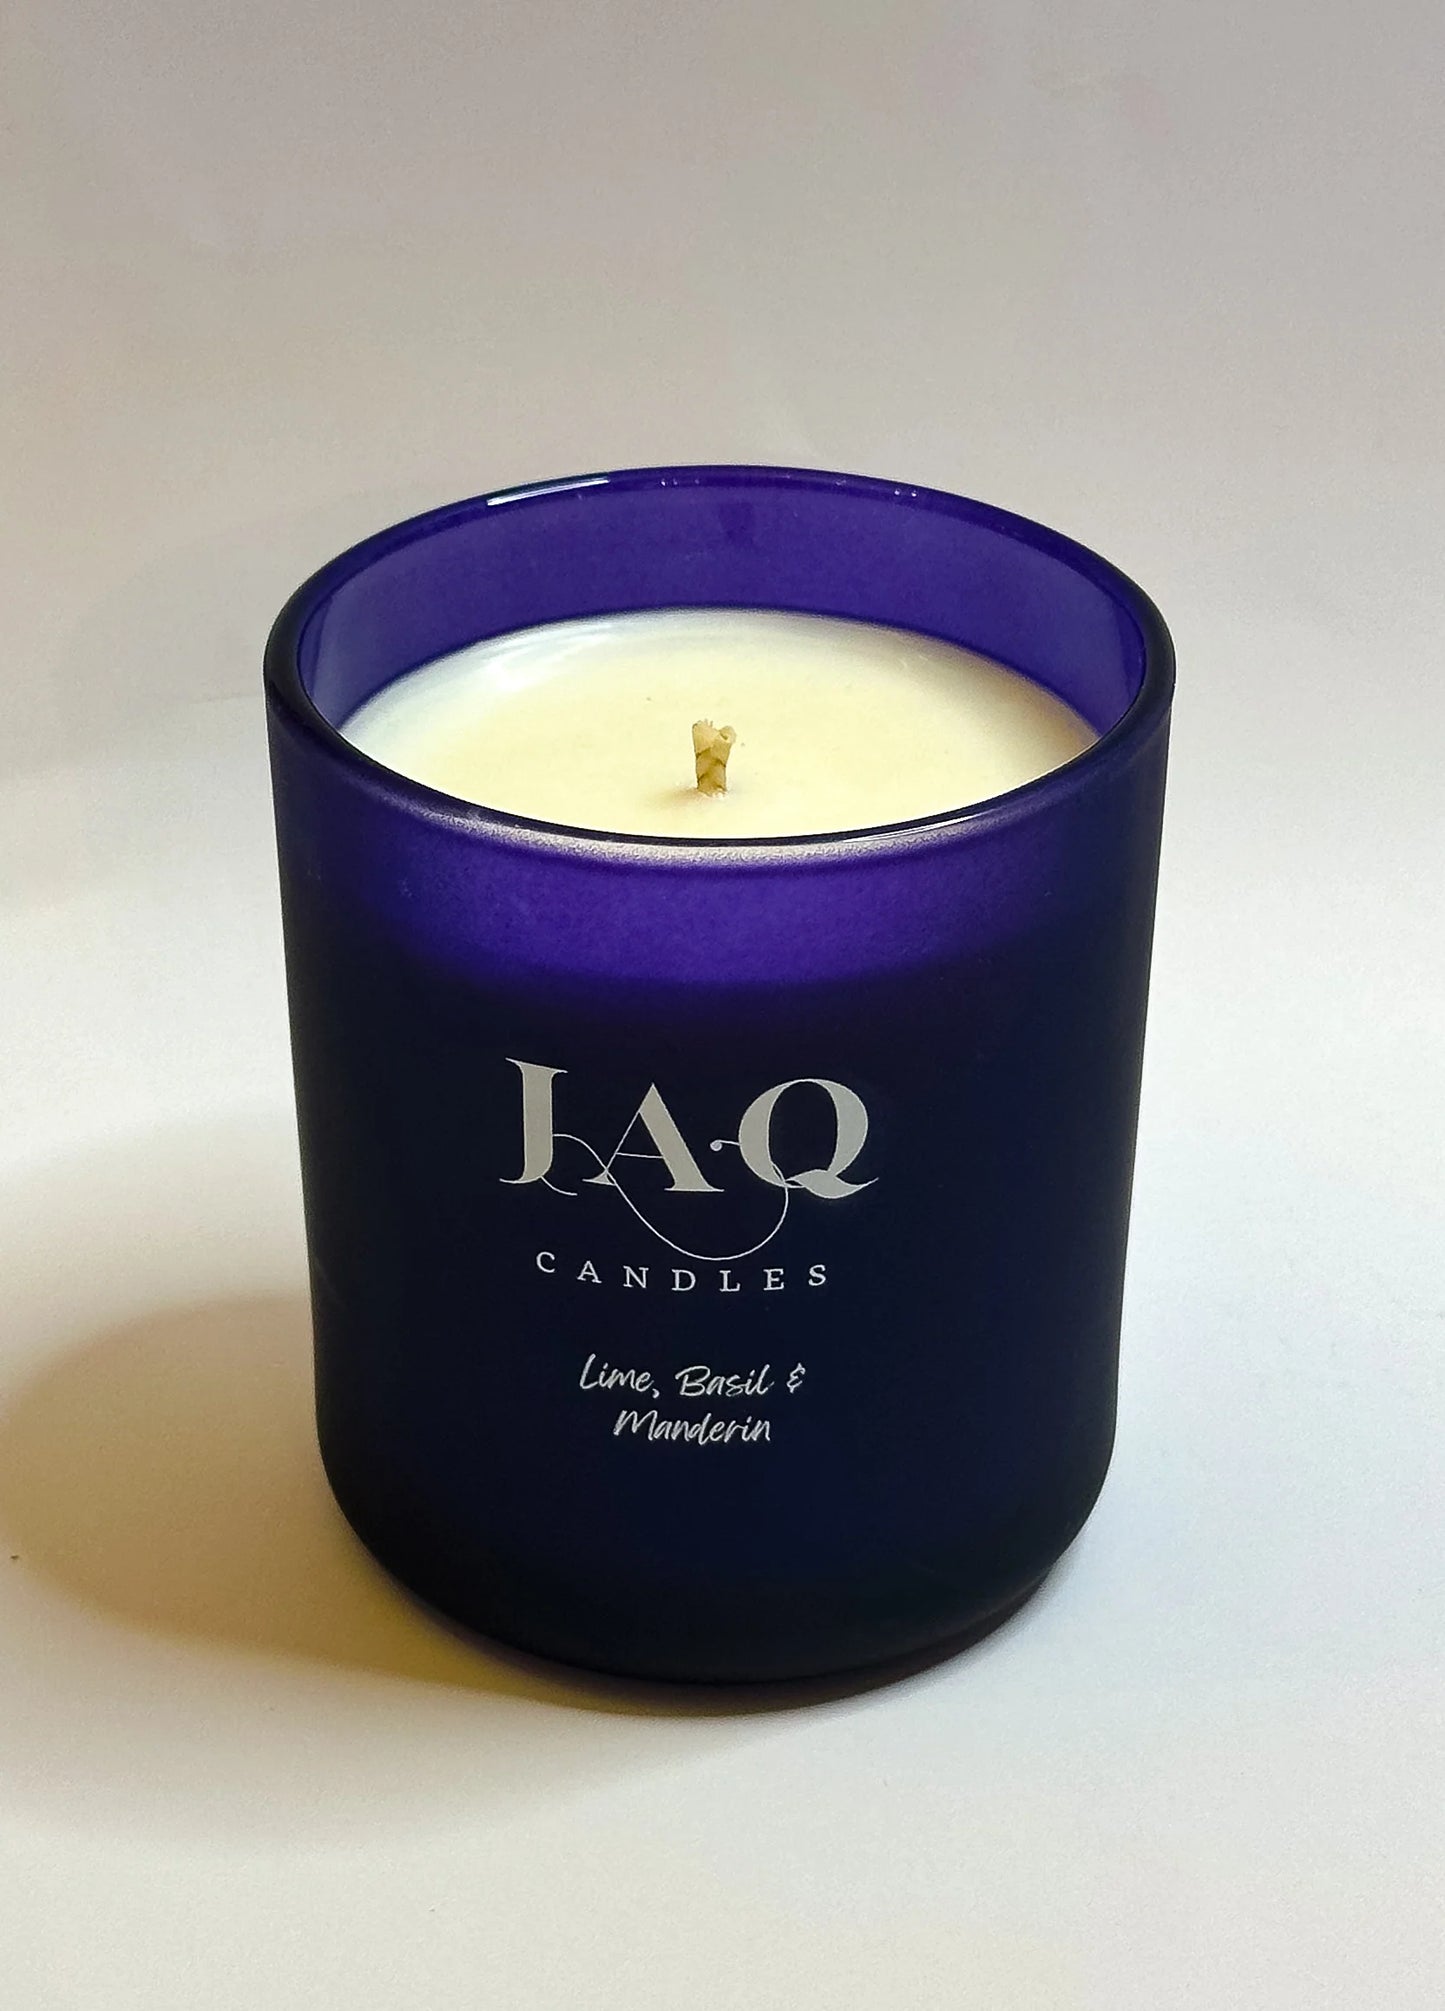 Lime Basil & Mandarin Candle by JAQ Candles